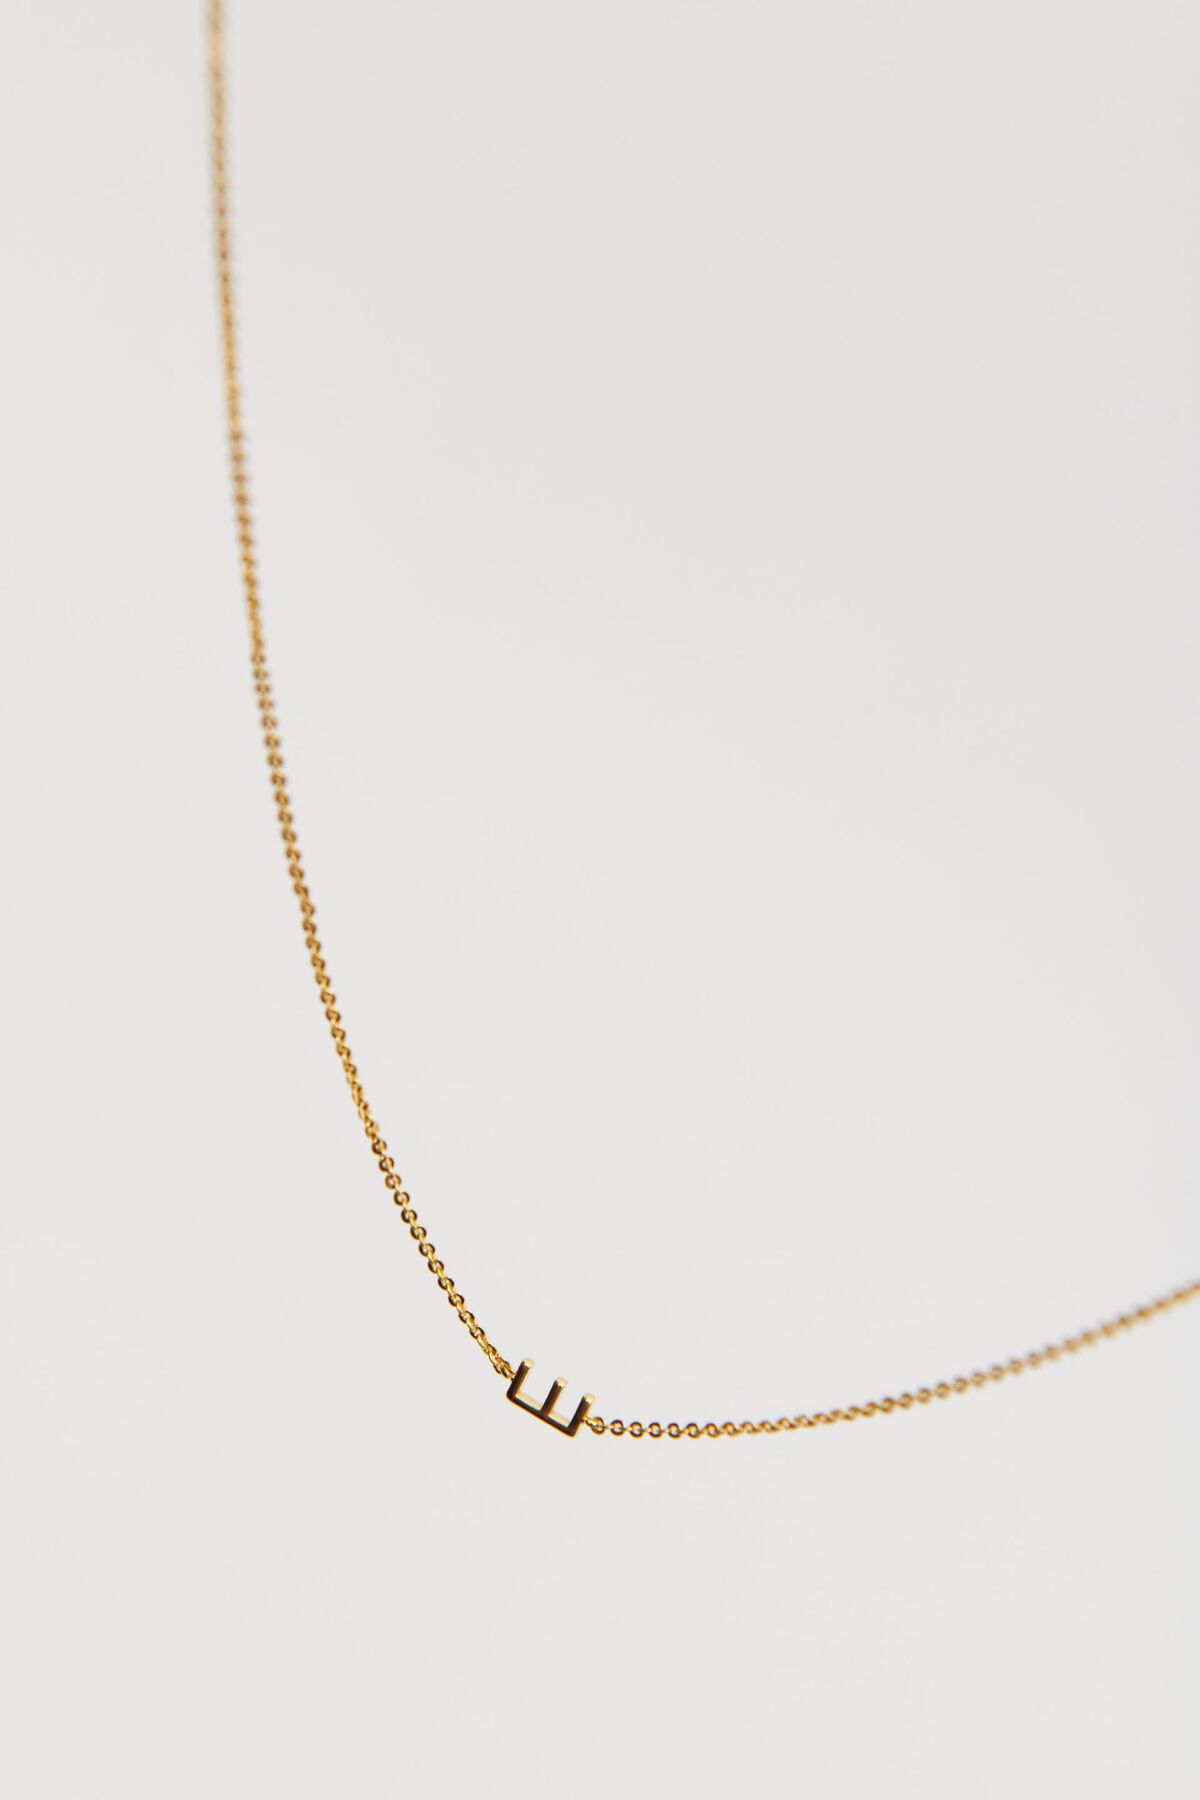 Garage 14K Gold Plated Initial Necklace. 5